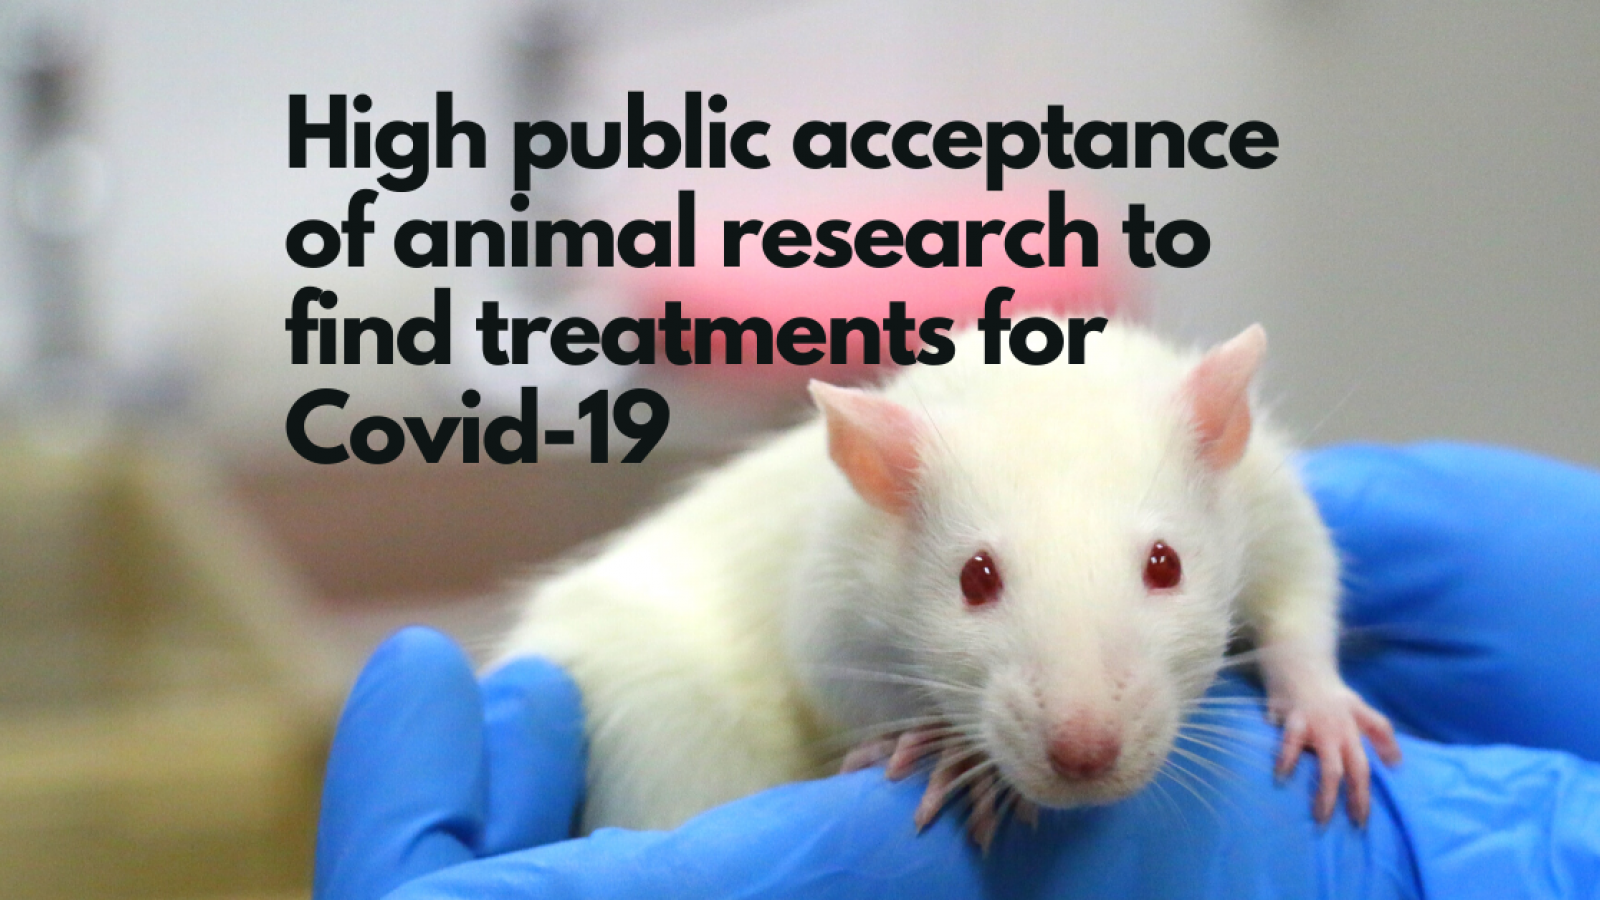 High public acceptance of animal research to find treatments for COVID-19